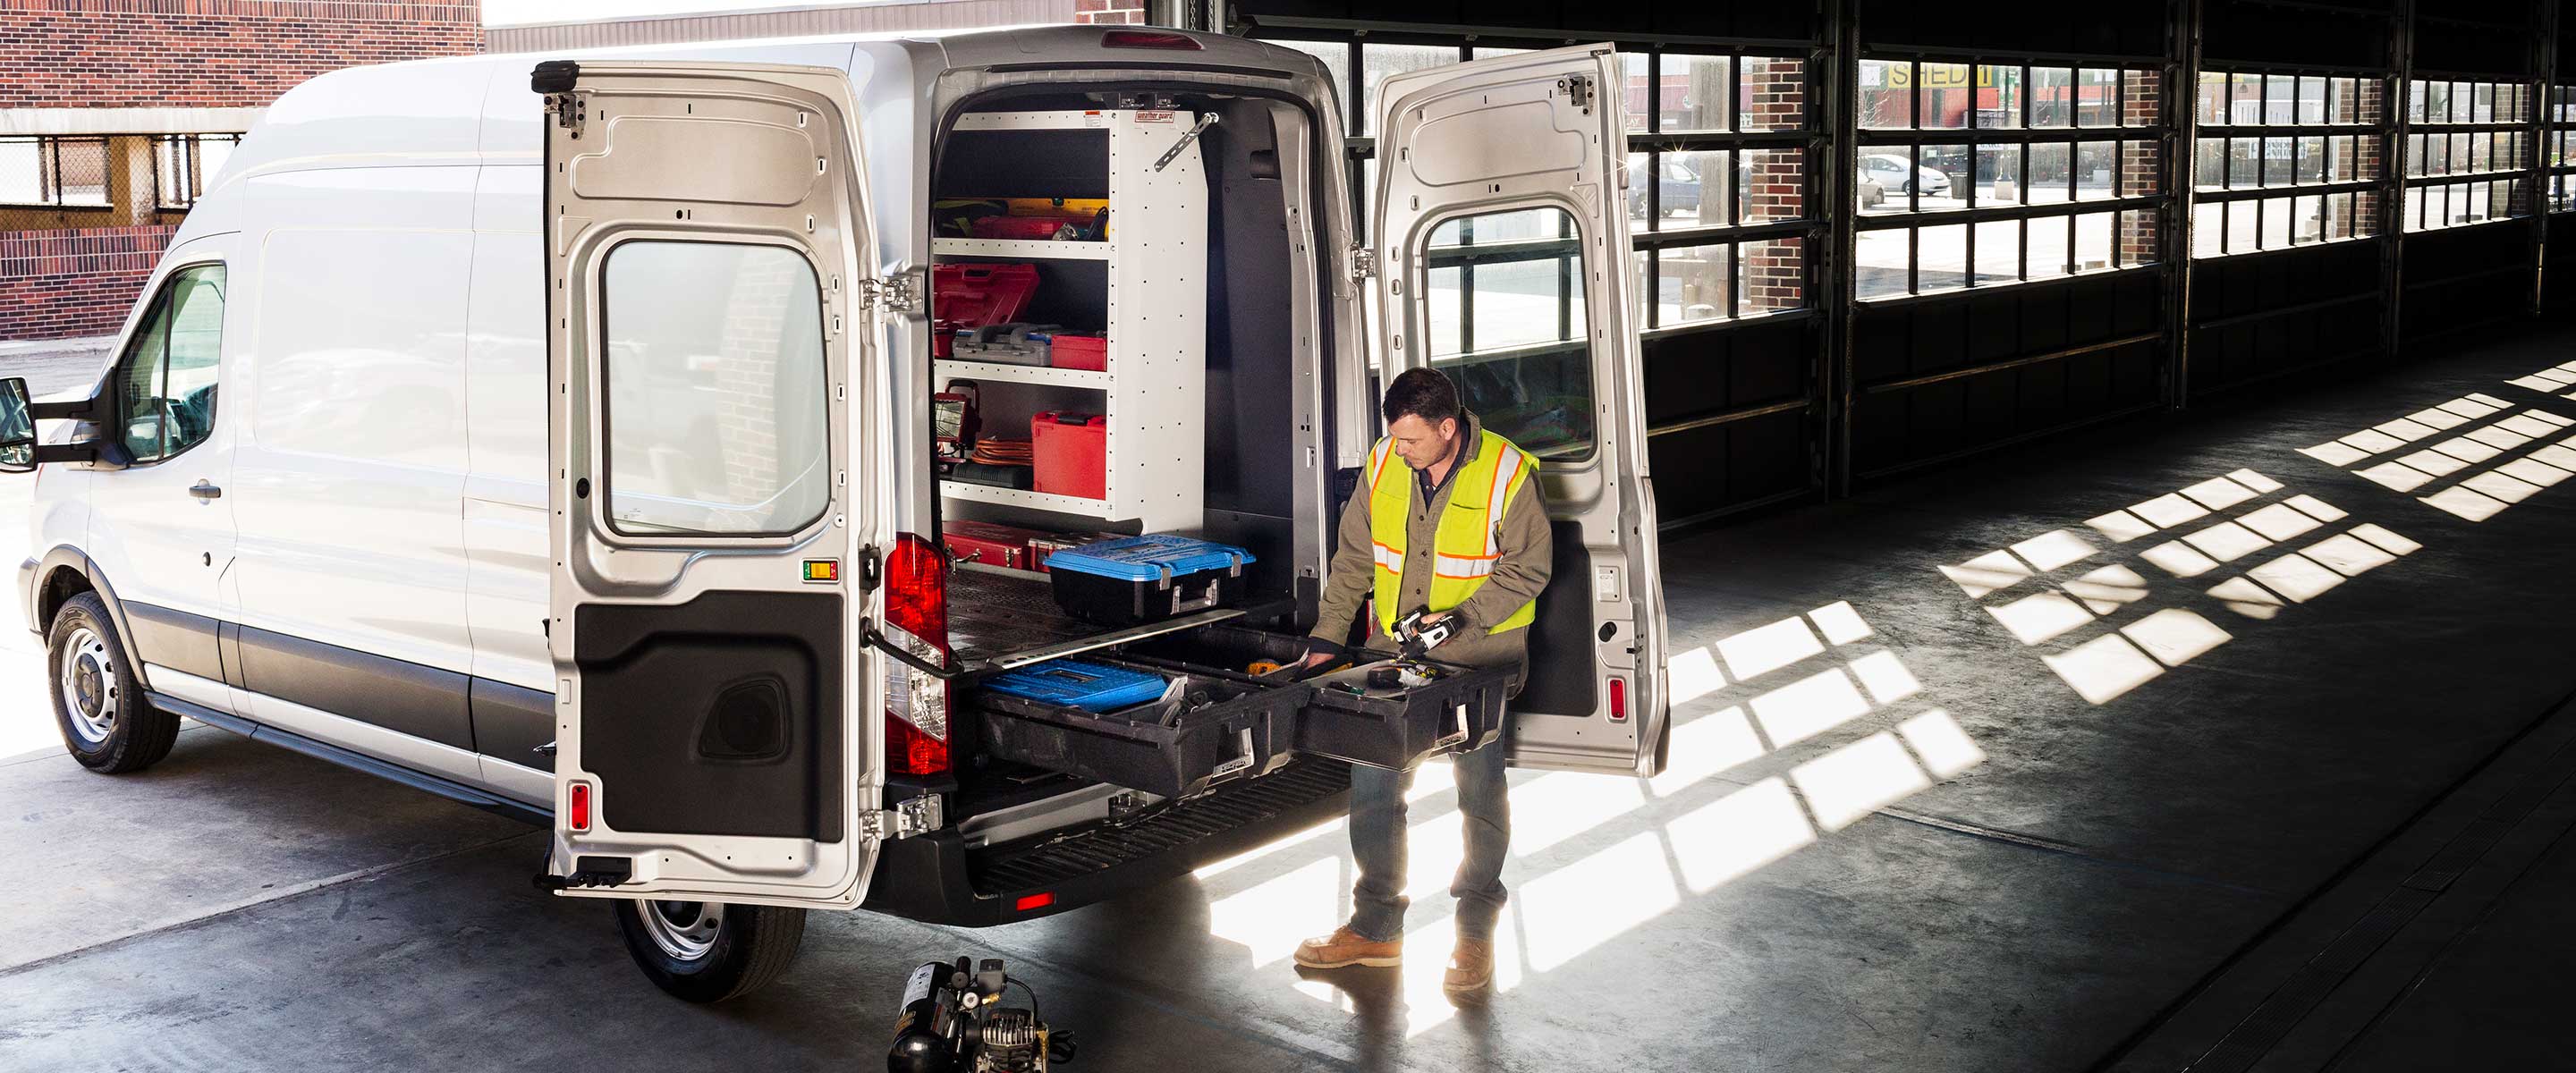 Cargo van with drawer system in the back and man accessing tools